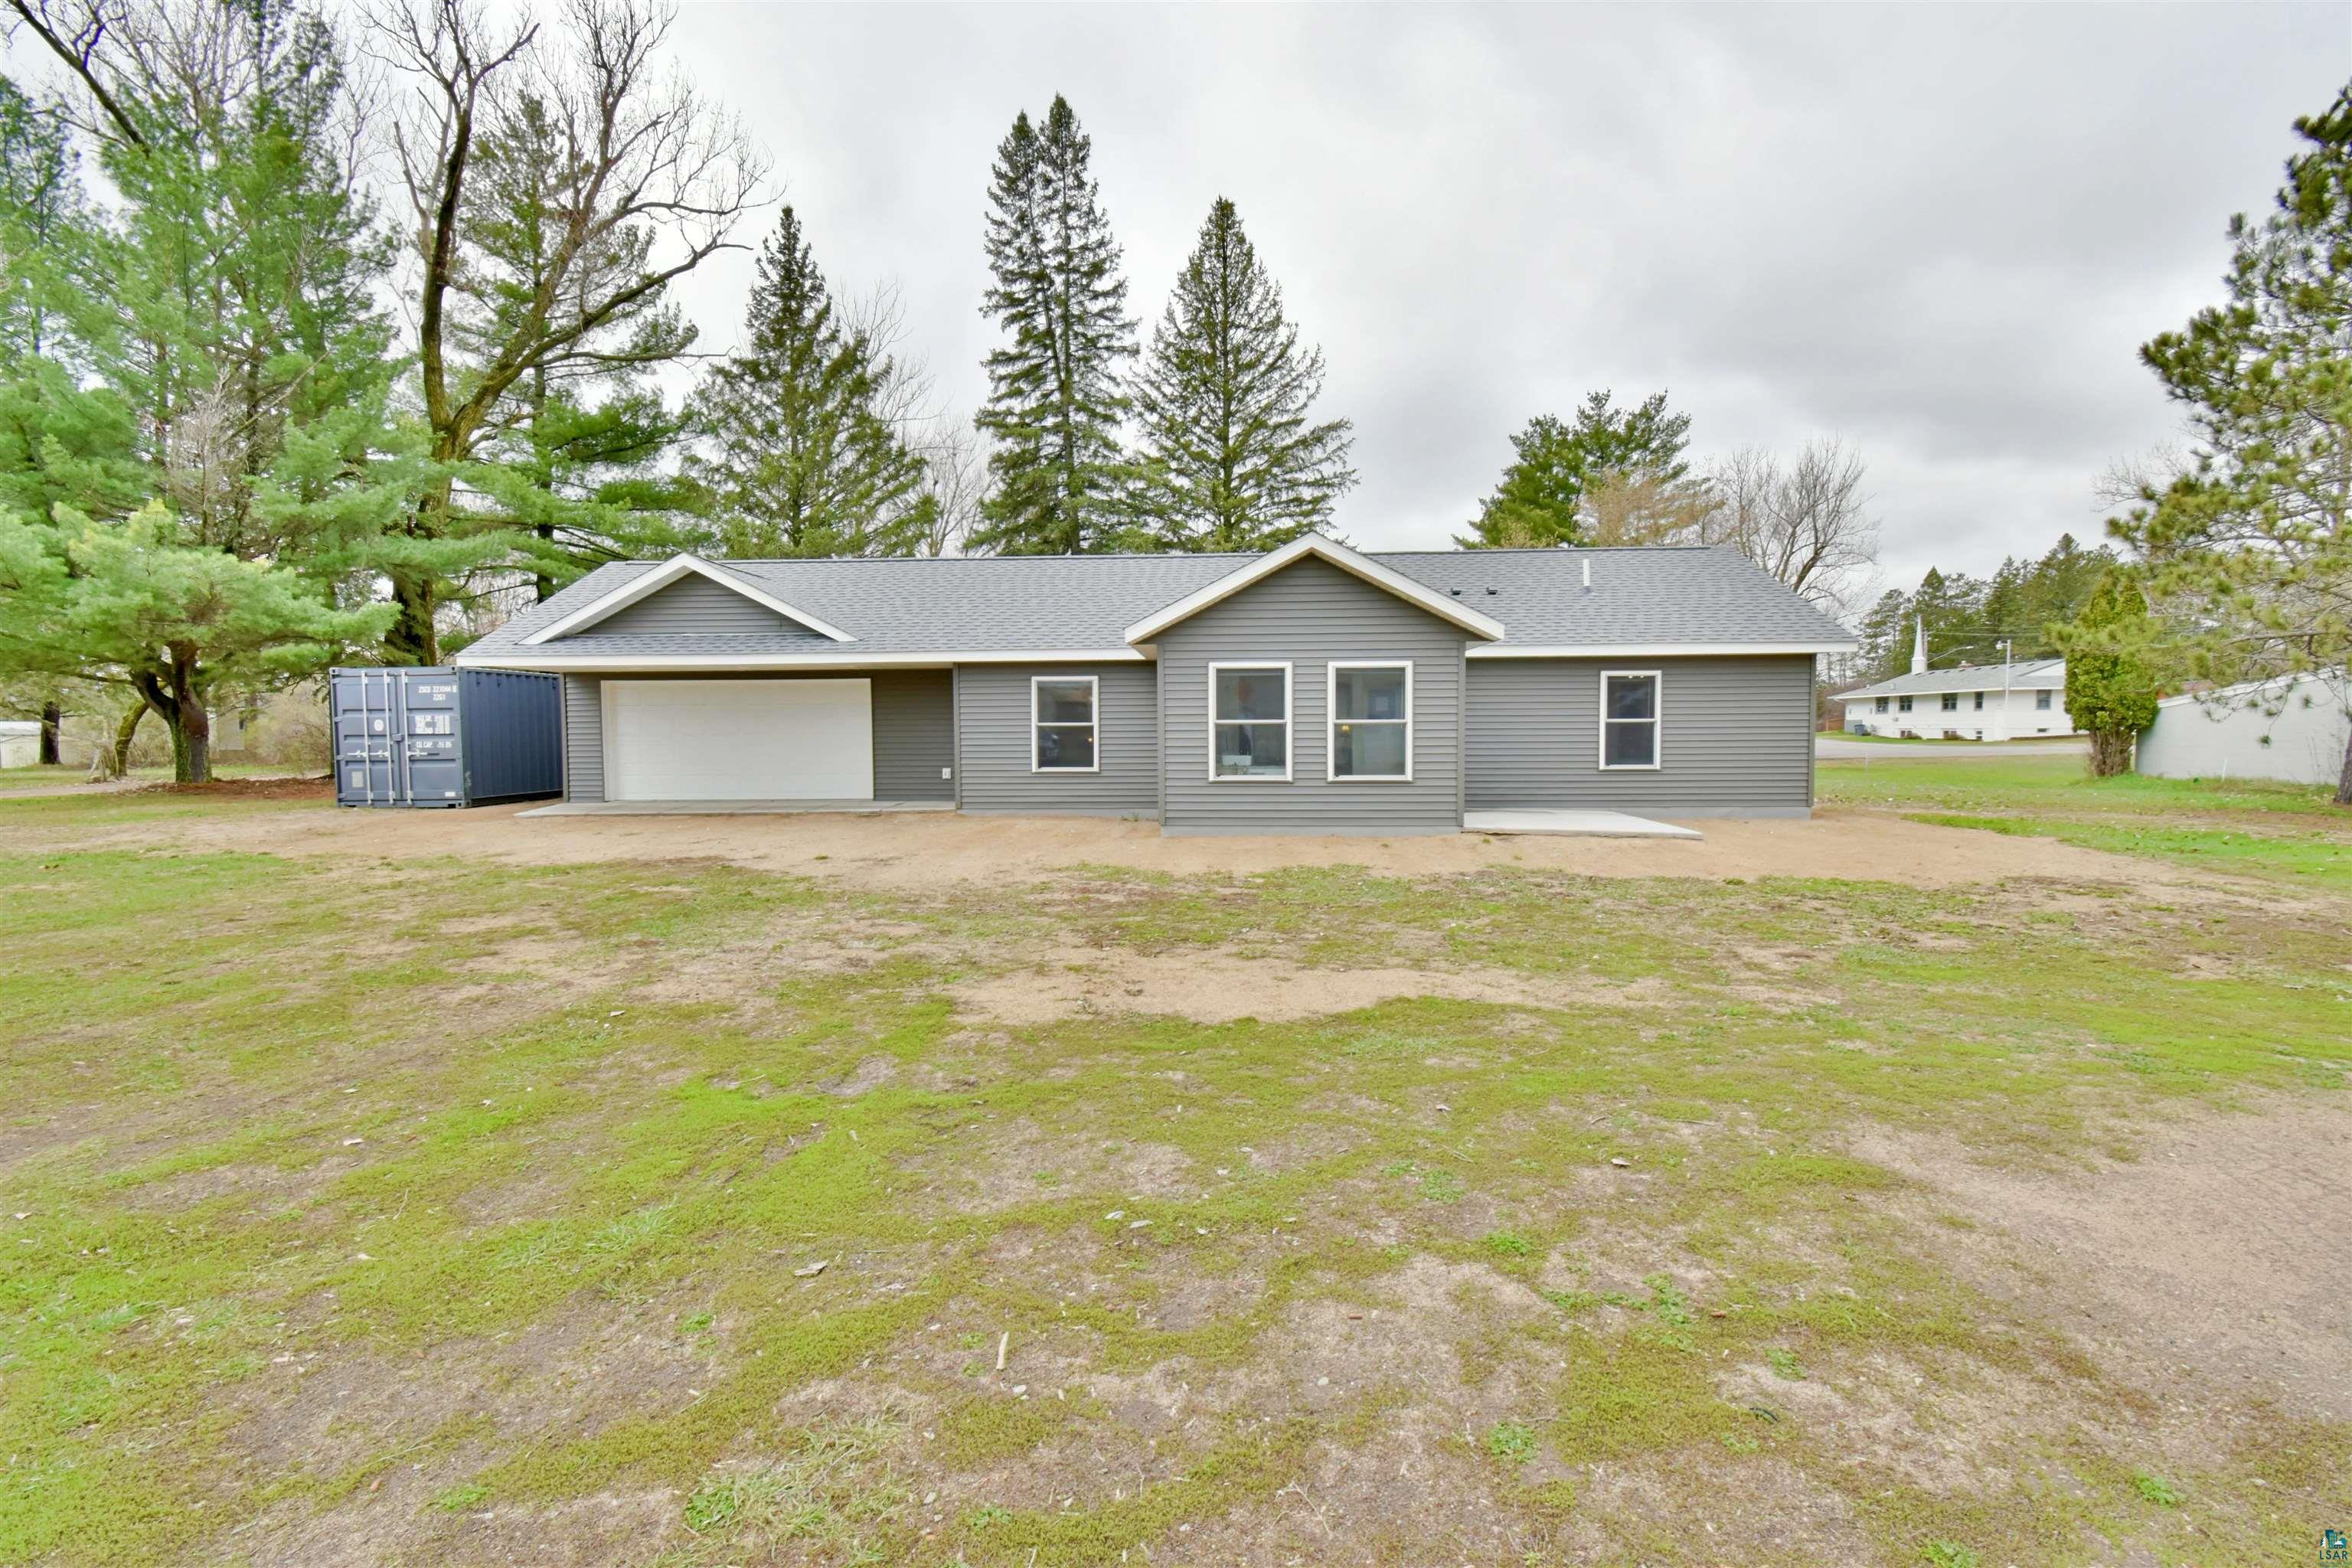 325 Evelyne Ave. W, Pine River, MN 56474-3112 Listing Photo  38